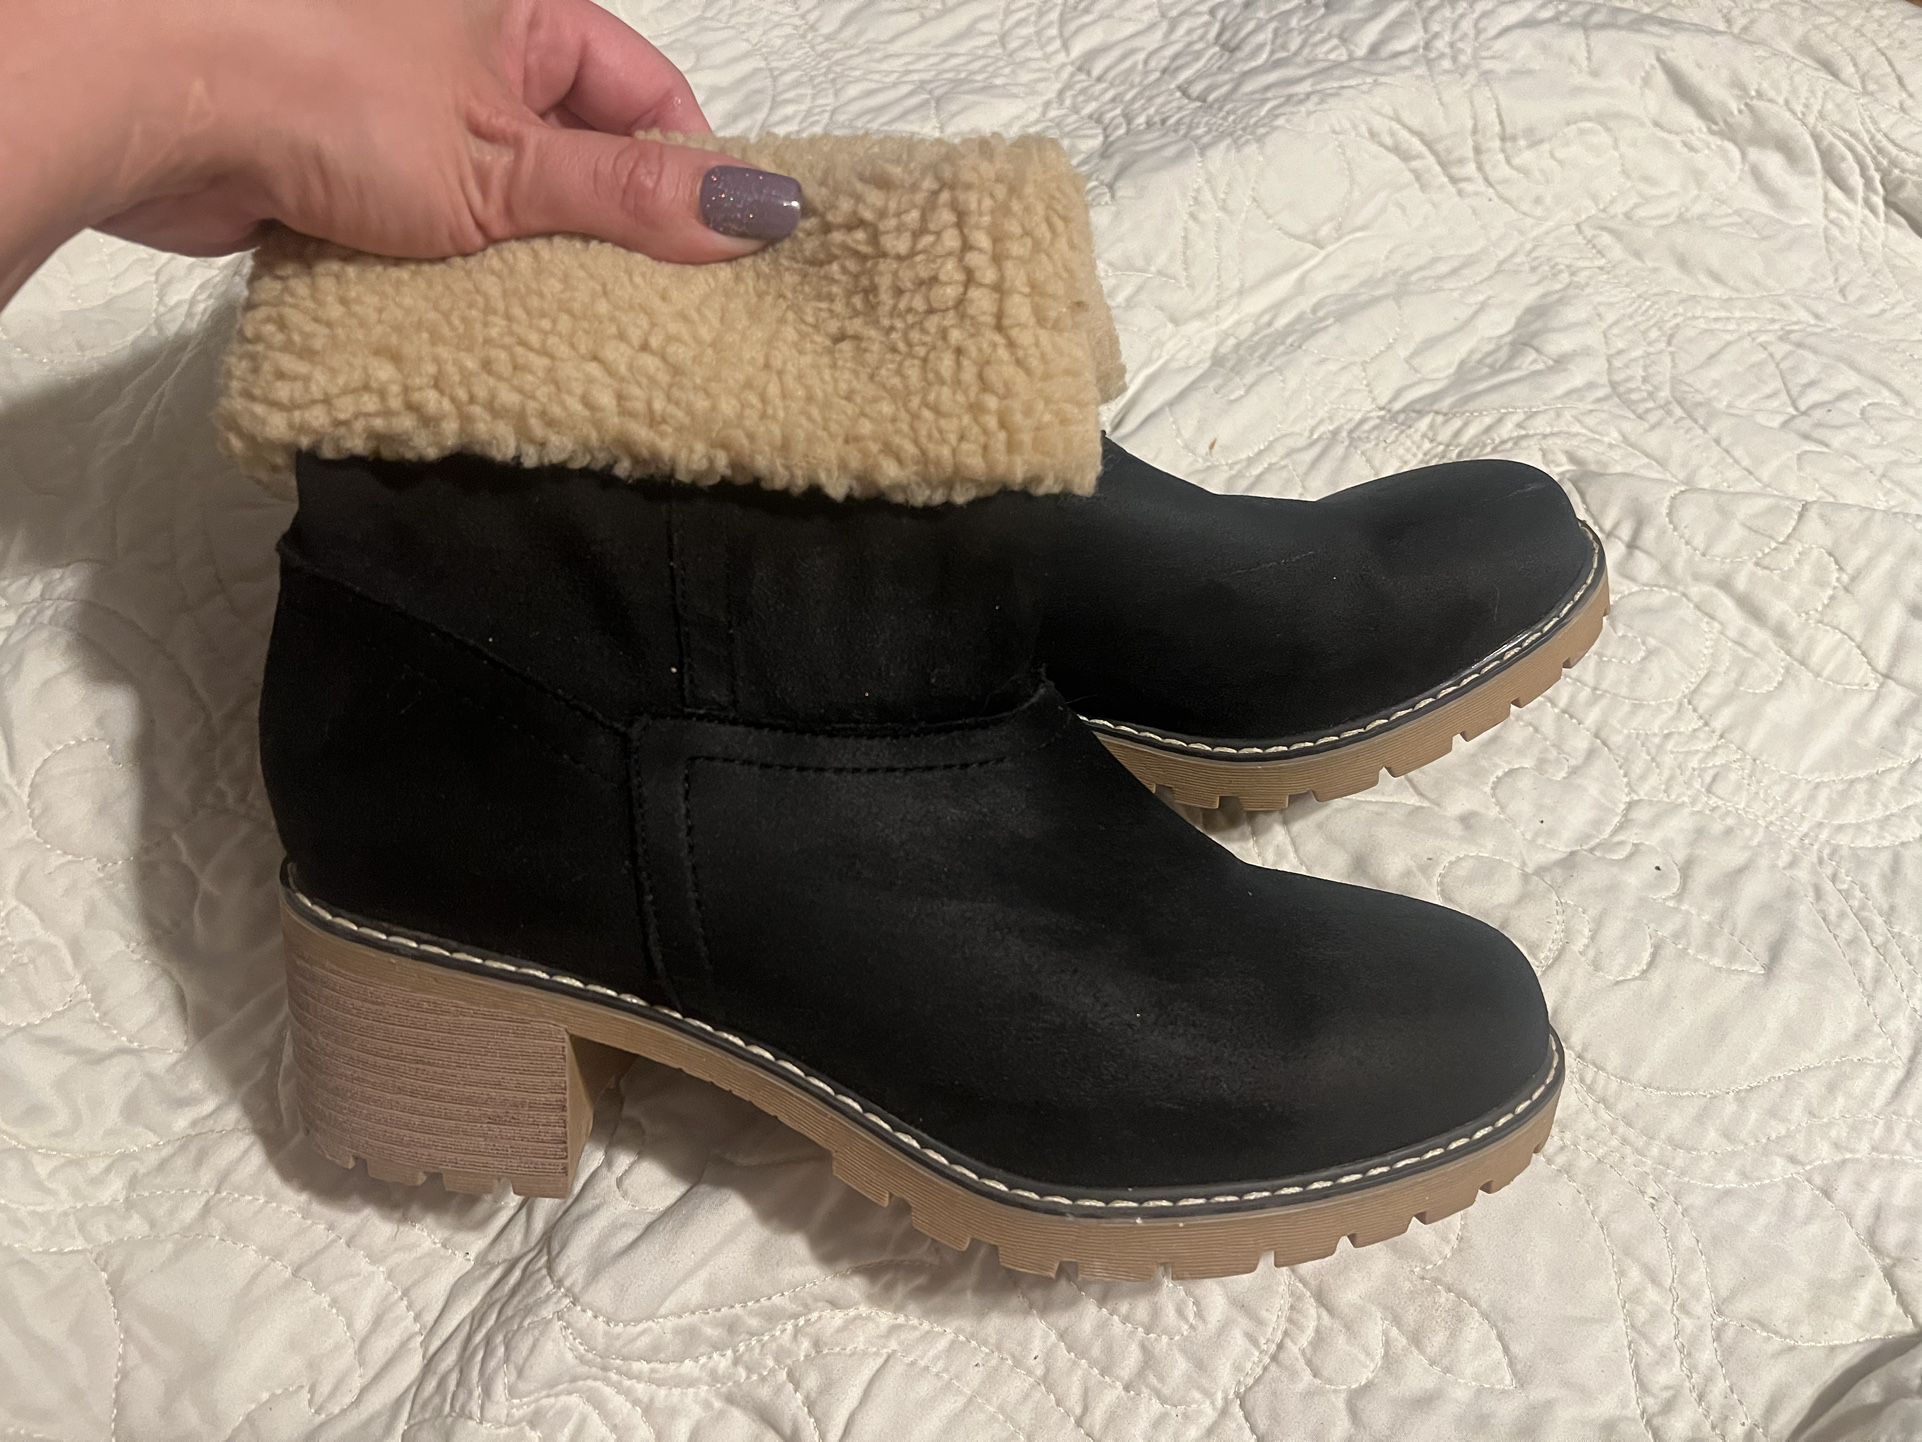 Maurices Women's Size 10 Black Boot